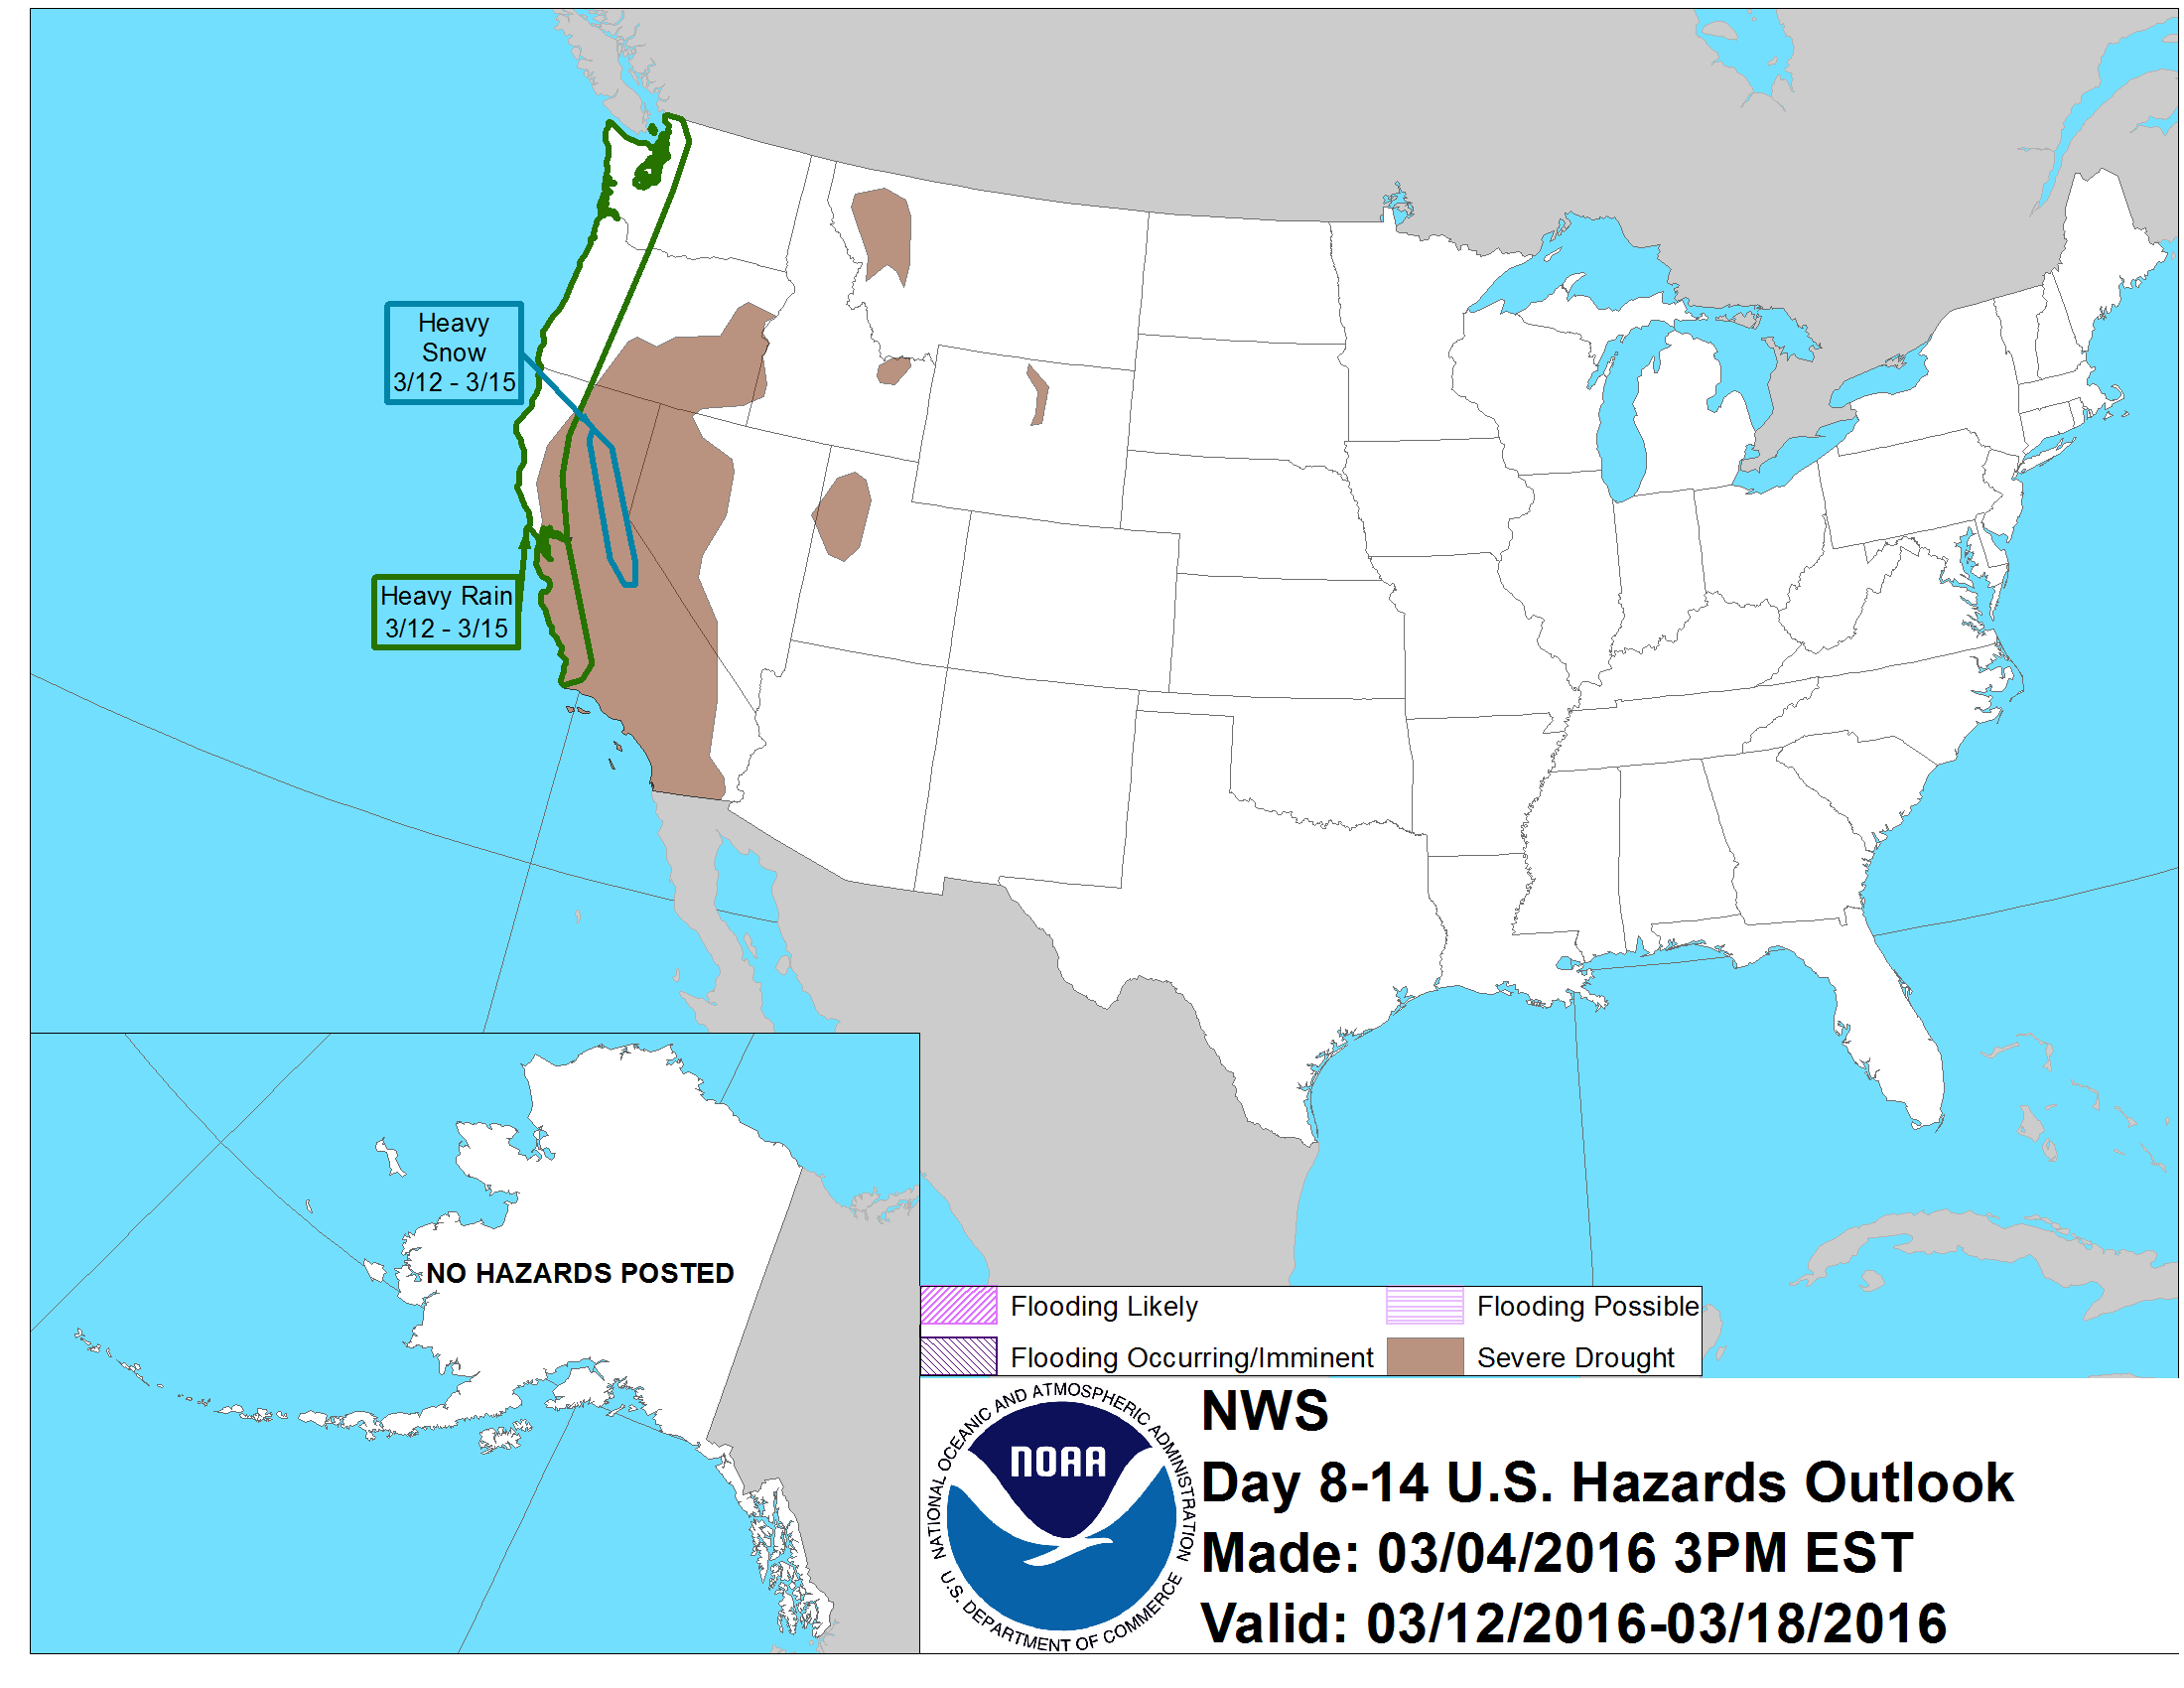 "Heavy Snow" forecast in CA from March 11-14th. image: noaa, today